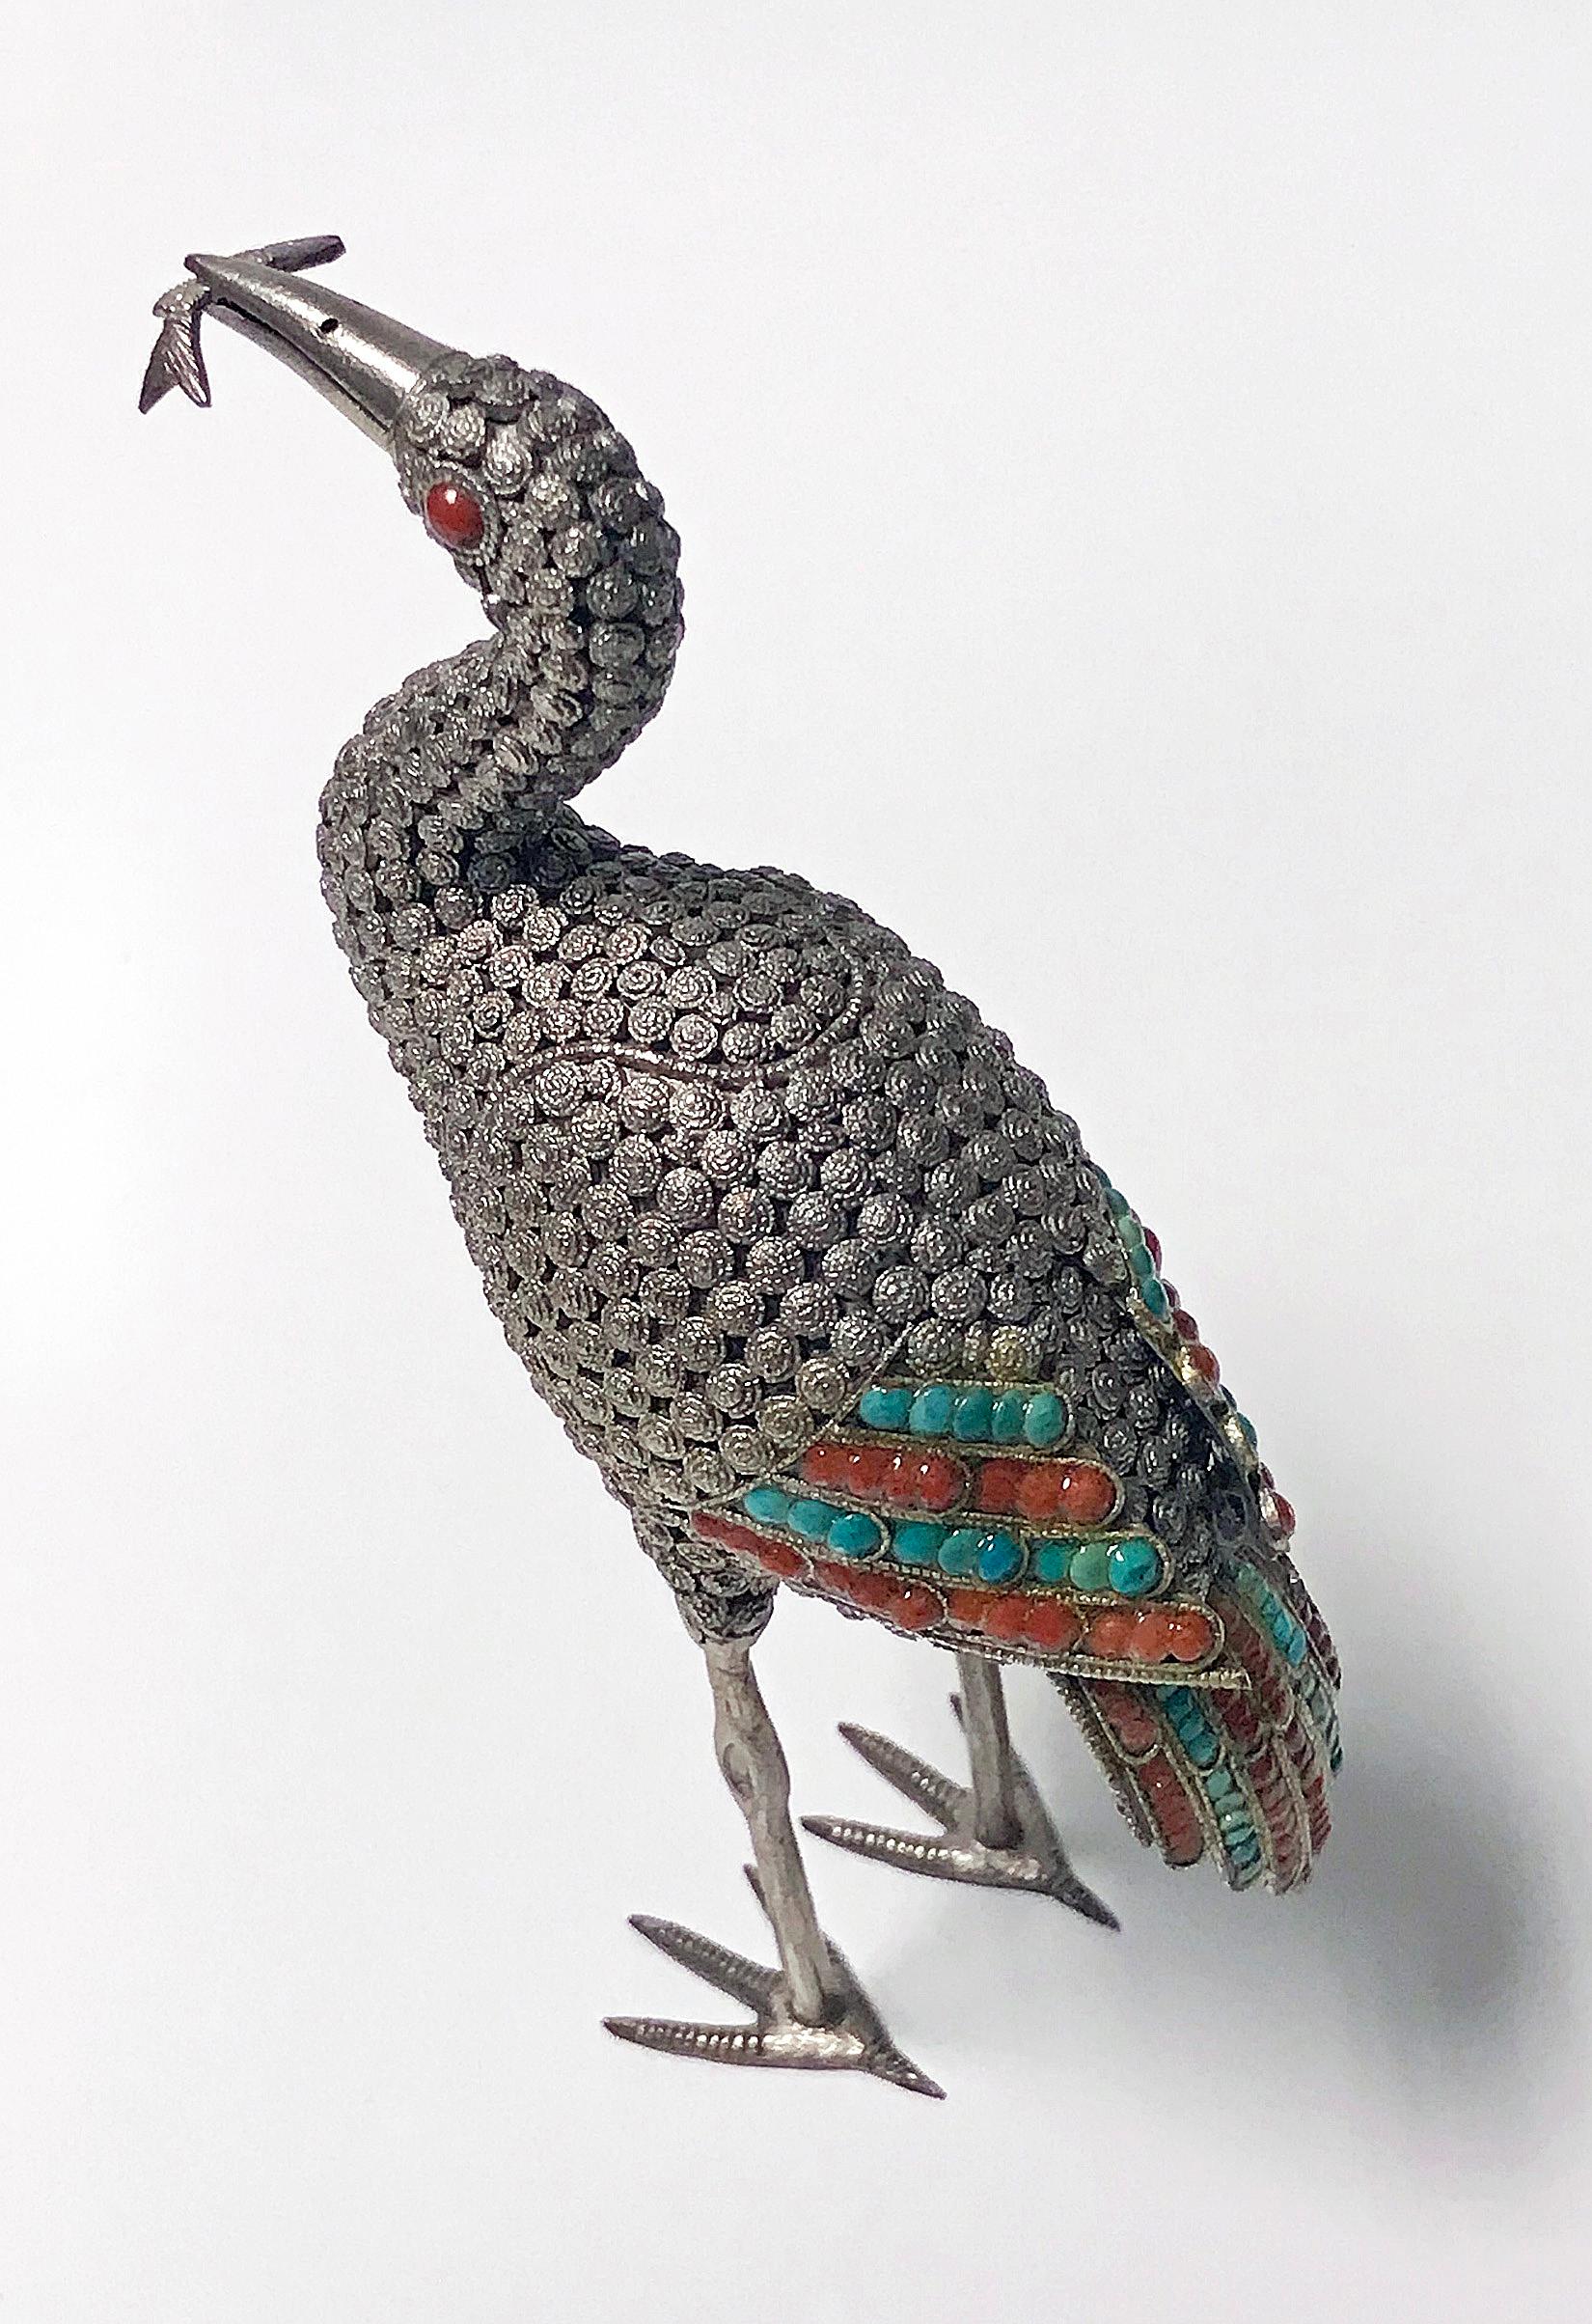 Cabochon Turquoise Sterling Silver Heron Egrit Sculpture, circa 1950